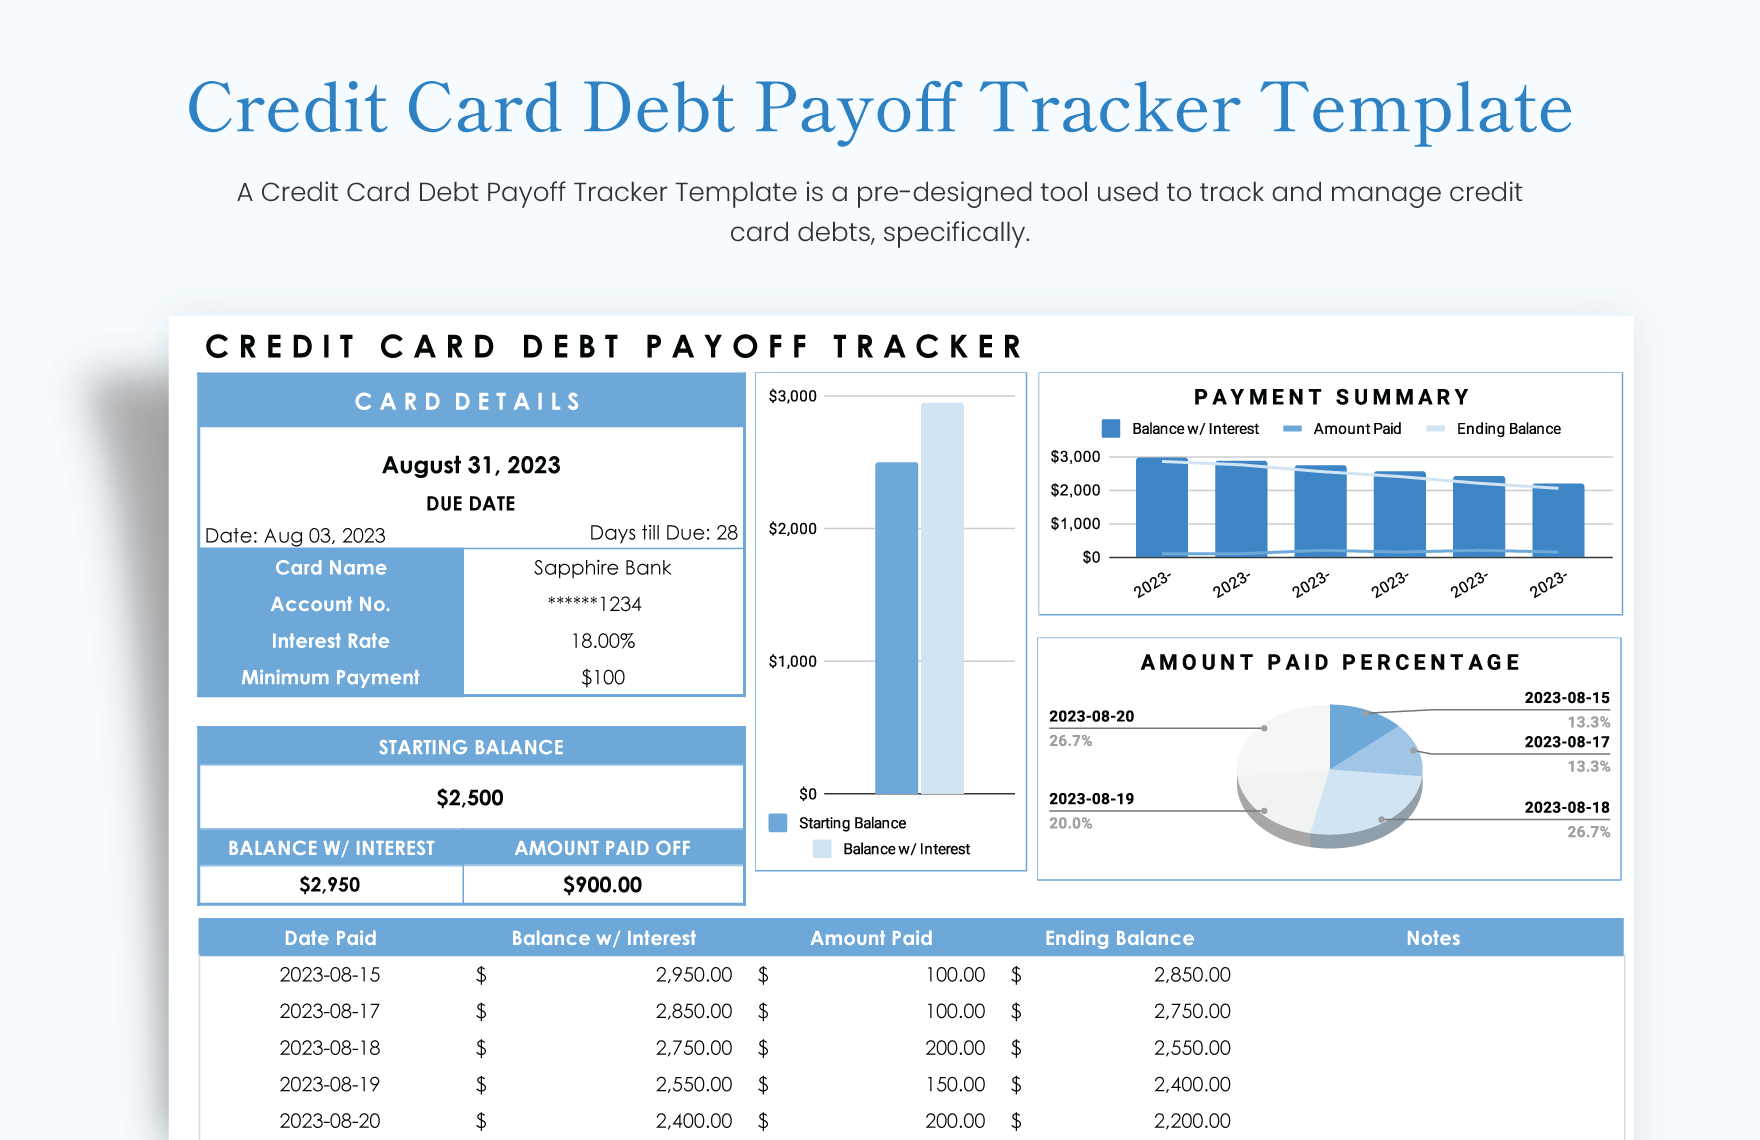 Credit Card Debt Payoff Tracker Template